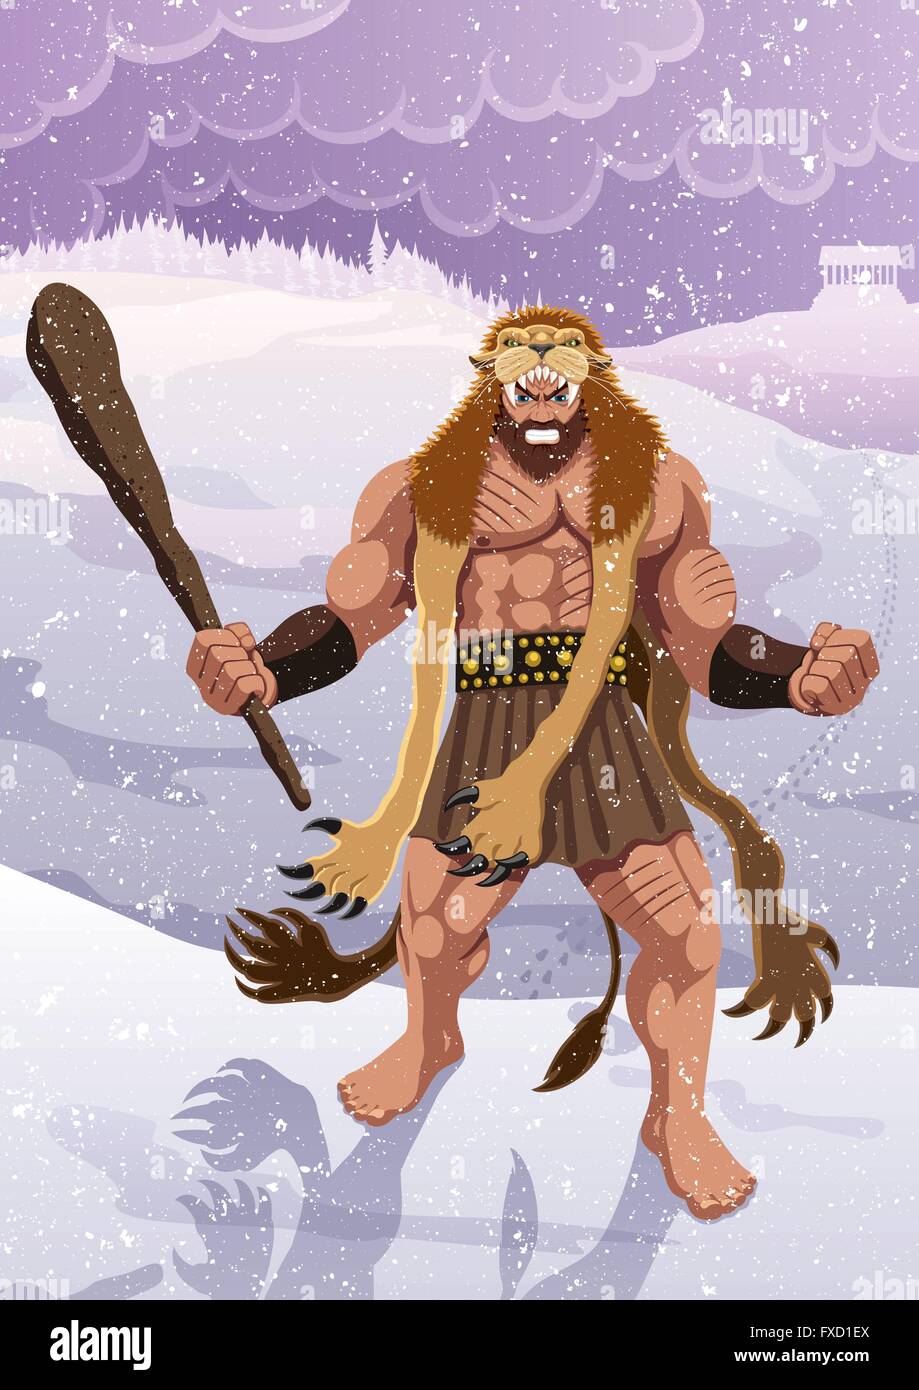 Heracles wearing the skin of the Nemean Lion. No transparency and gradients used. Stock Vector